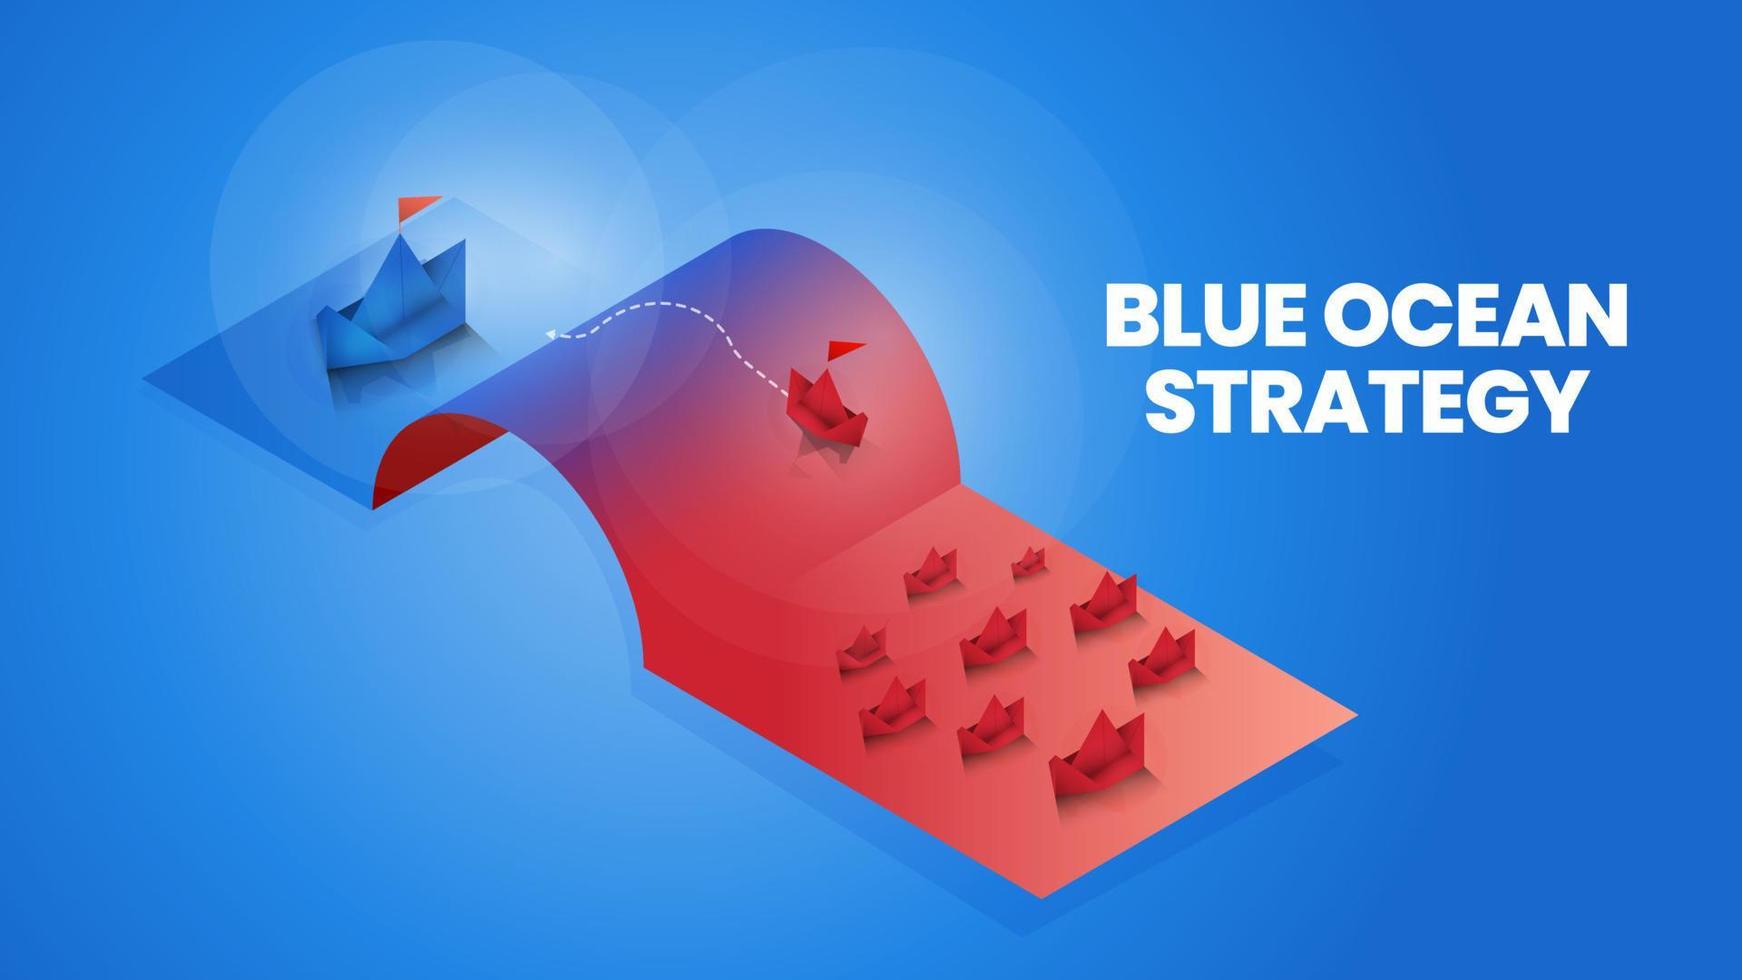 Isometric blue ocean strategy is comparison 2 market, red ocean and blue ocean market and customer for marketing analysis and plan.The origami presentation metaphor pioneer market has no competition vector